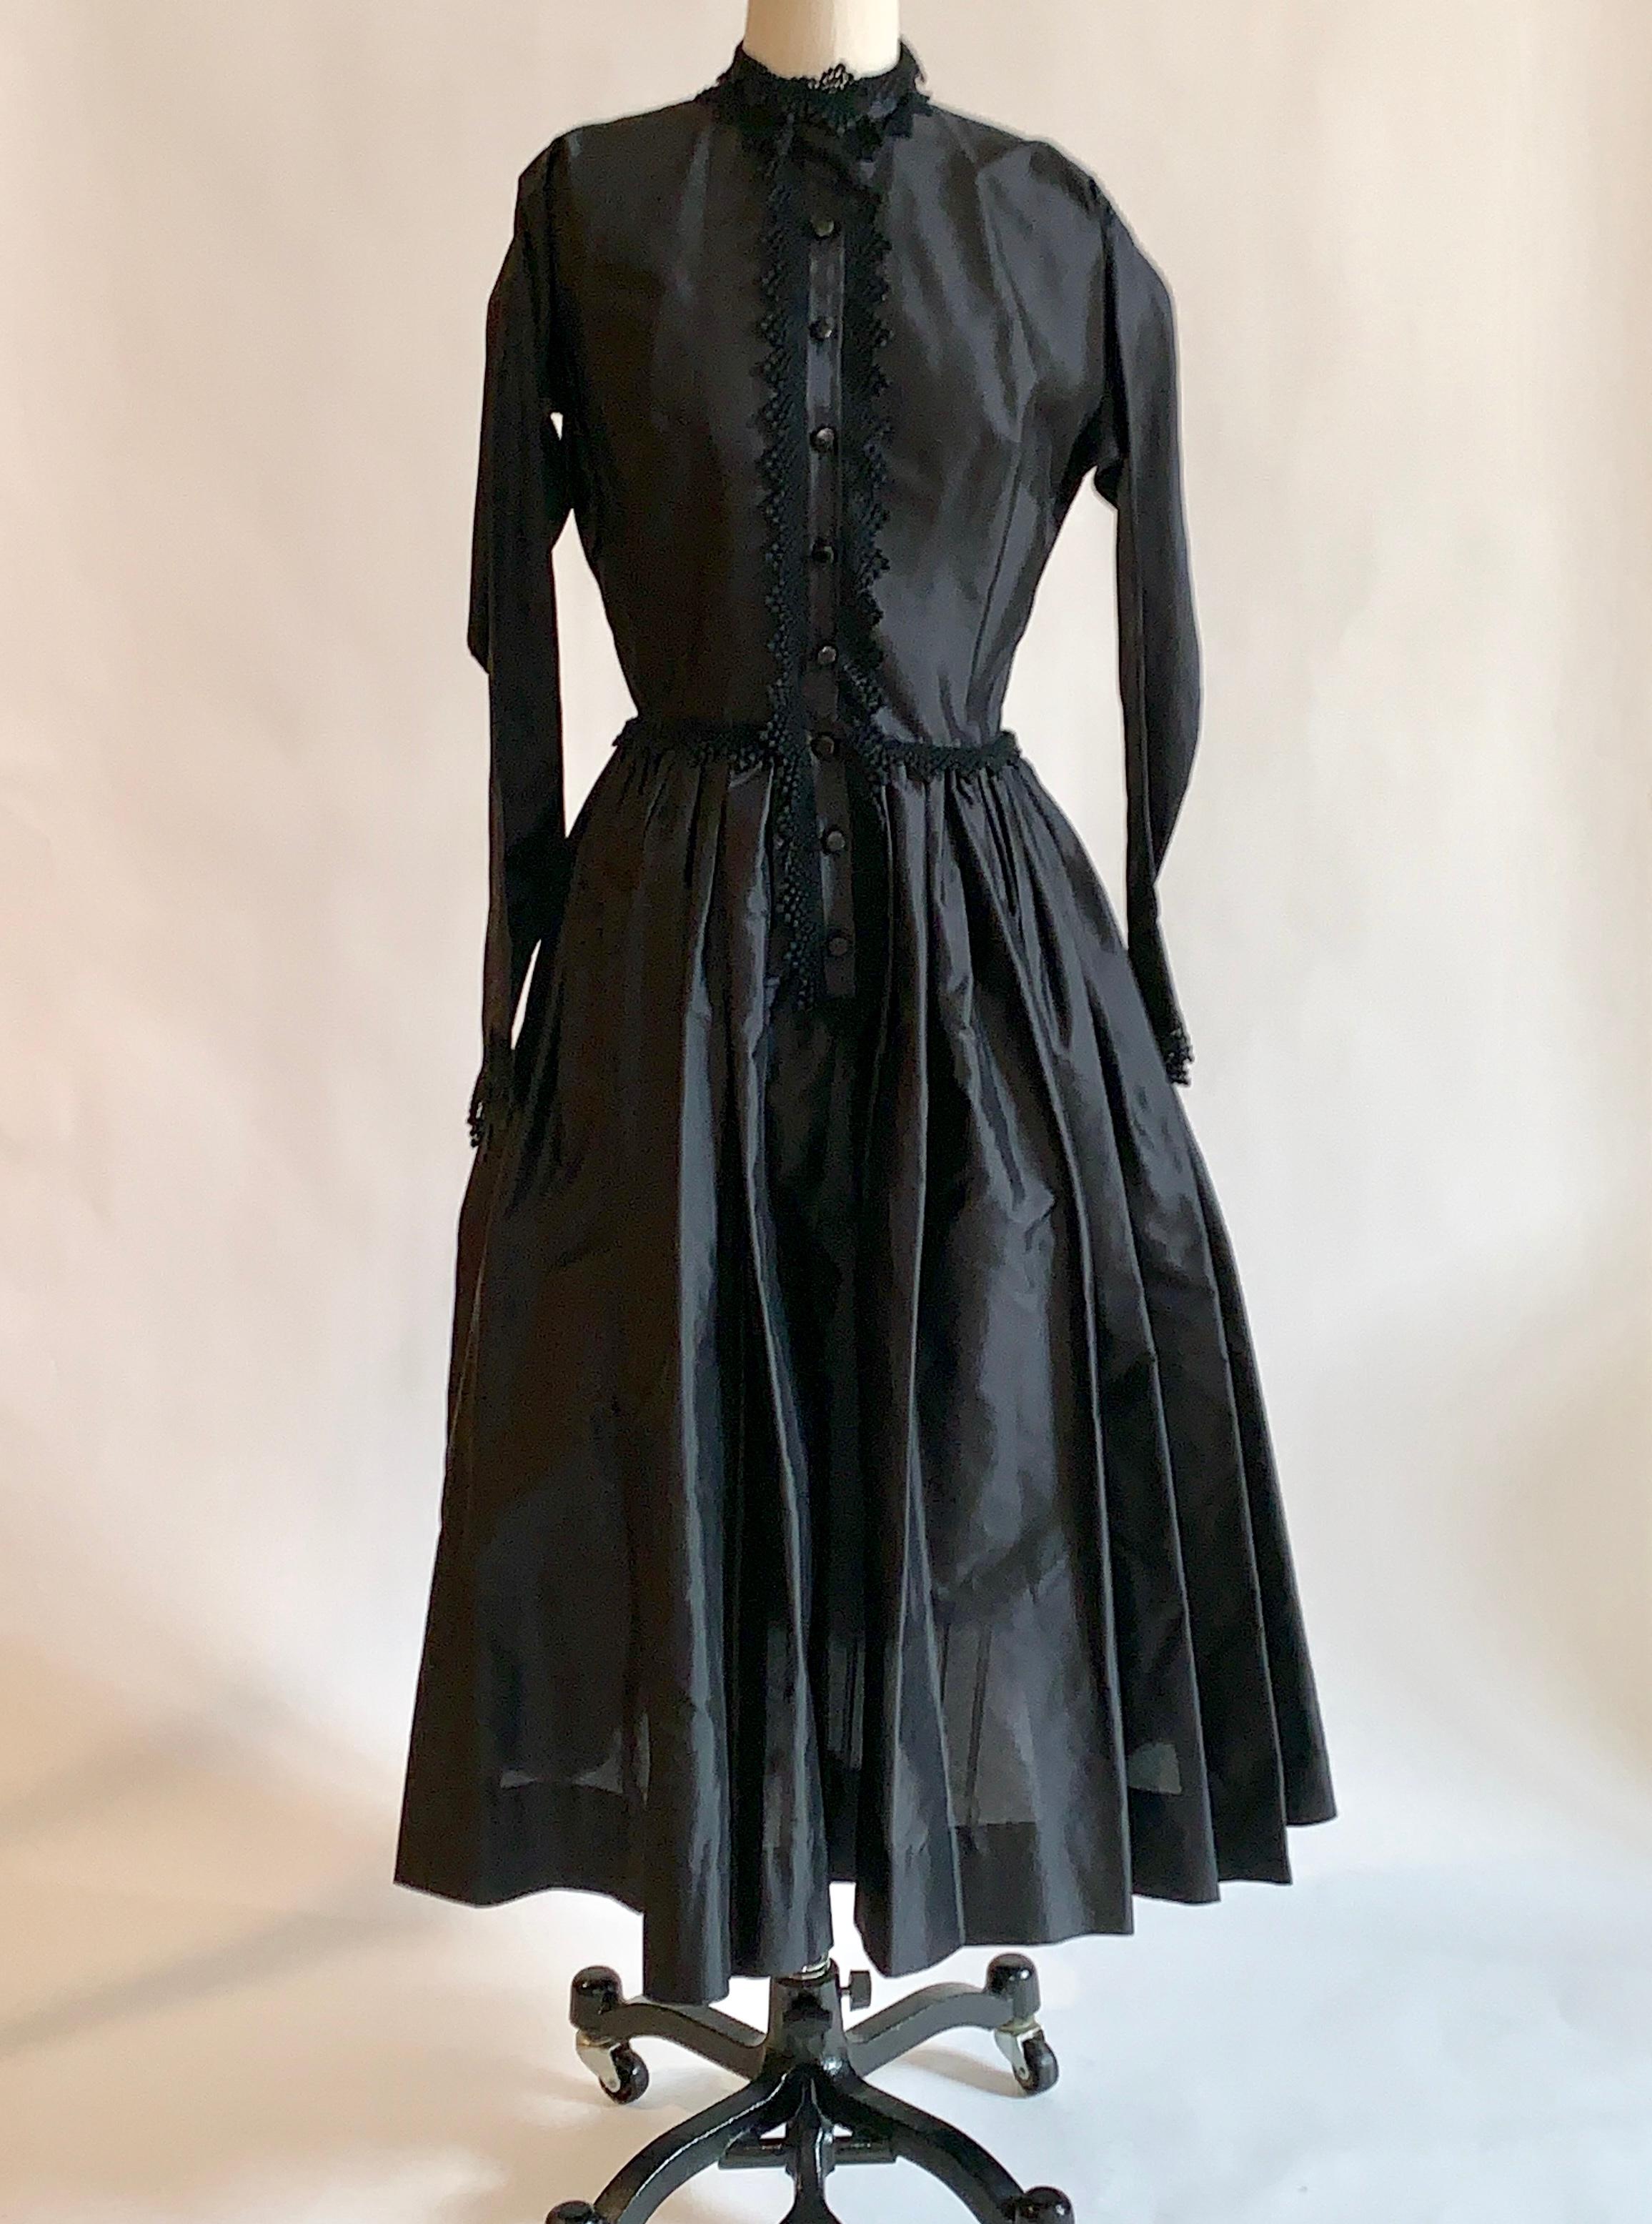 Claire McCardell for Townley 1950s black dress with shirt style top, full skirt, and long sleeves. Lace trim at placket, cuffs, and collar. Cuffs can be folded up at wrist, or worn so that the pointed cuff covers the palm. Closes with buttons at